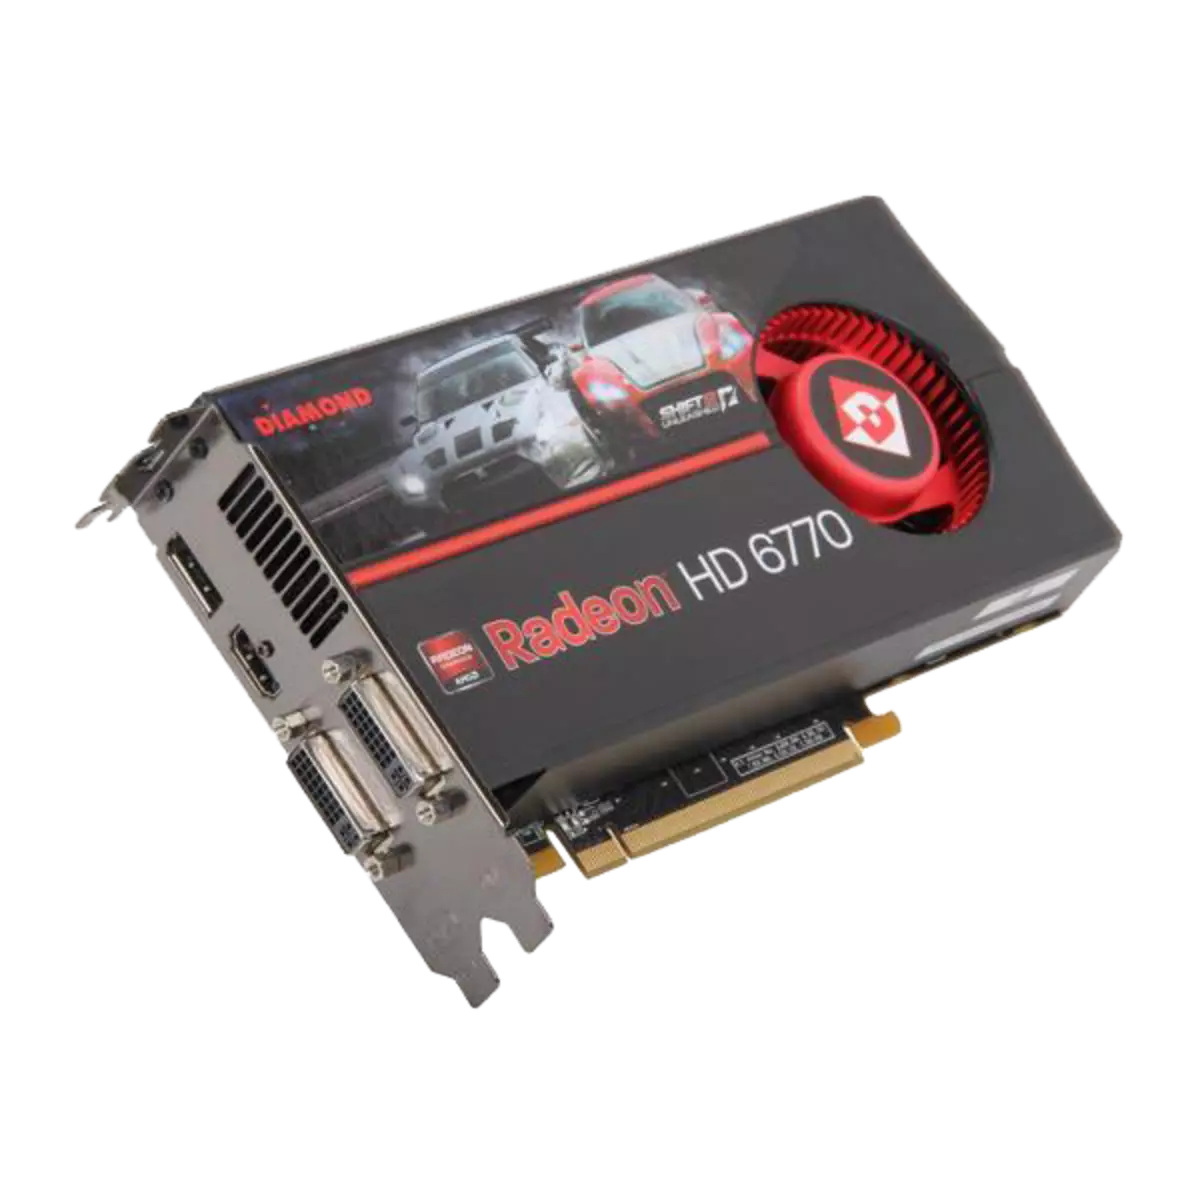 Download Drivers for AMD Radeon HD 6700 Series